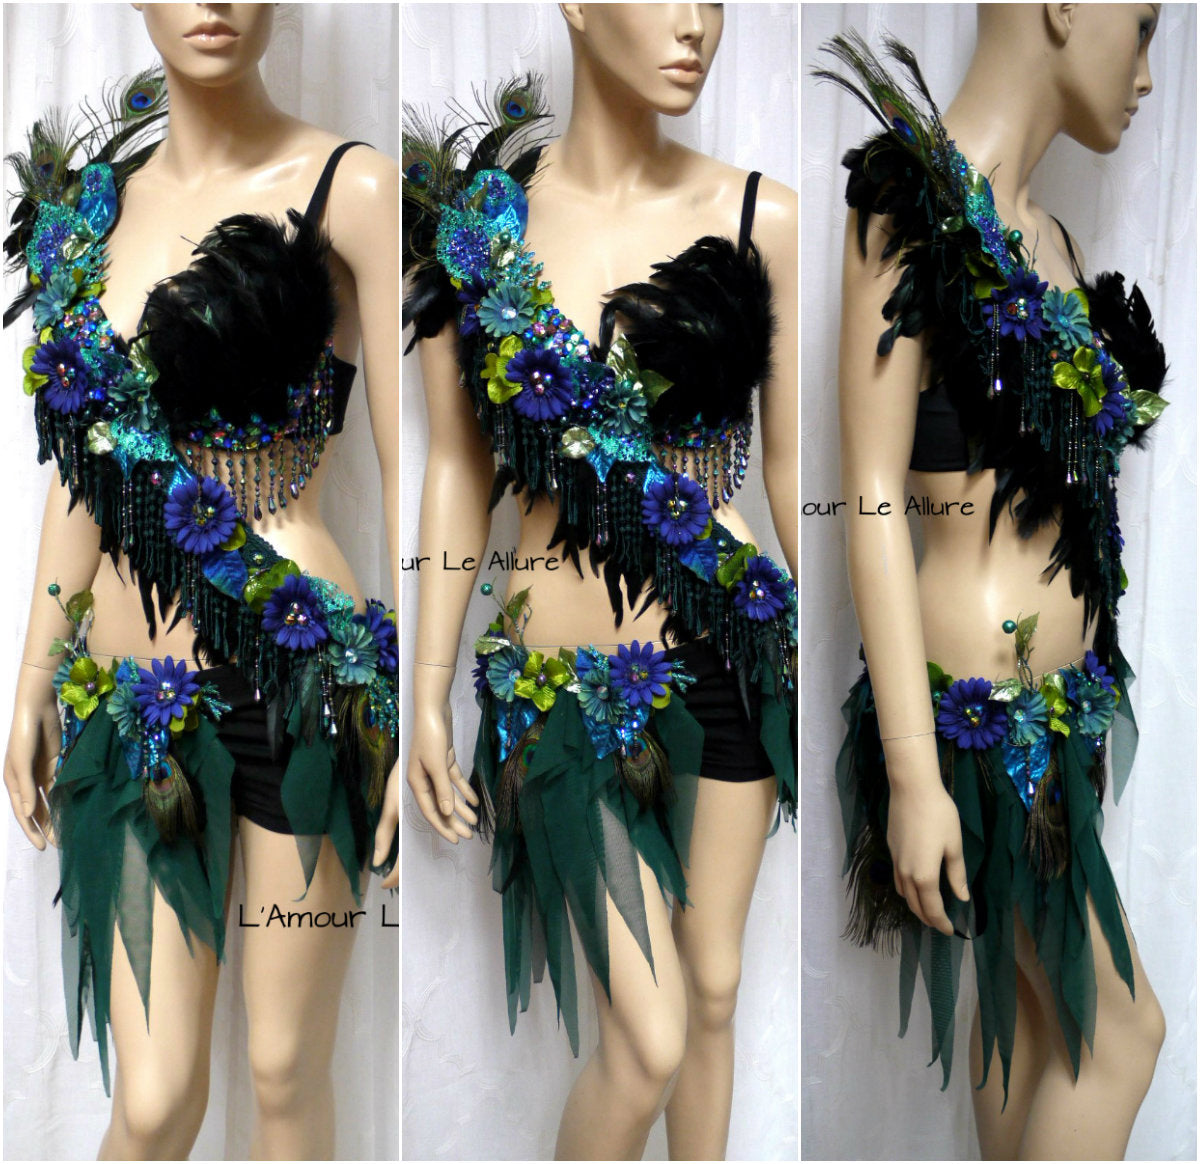 Peacock Feather Costume Rave Bra and Skirt Bottom – L'Amour Le Allure